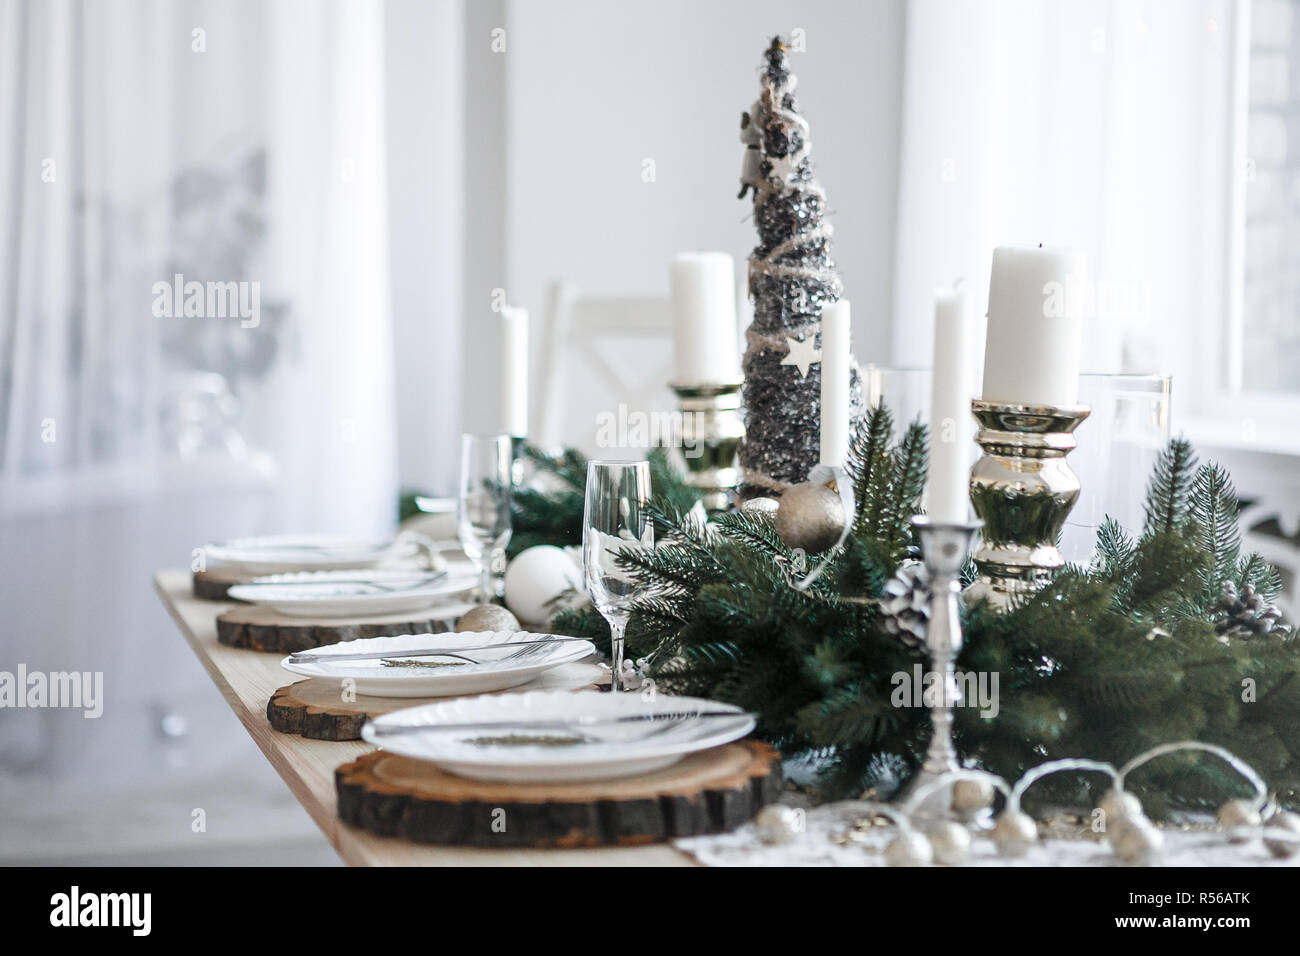 Table served for Christmas dinner in living room, close up view Stock Photo